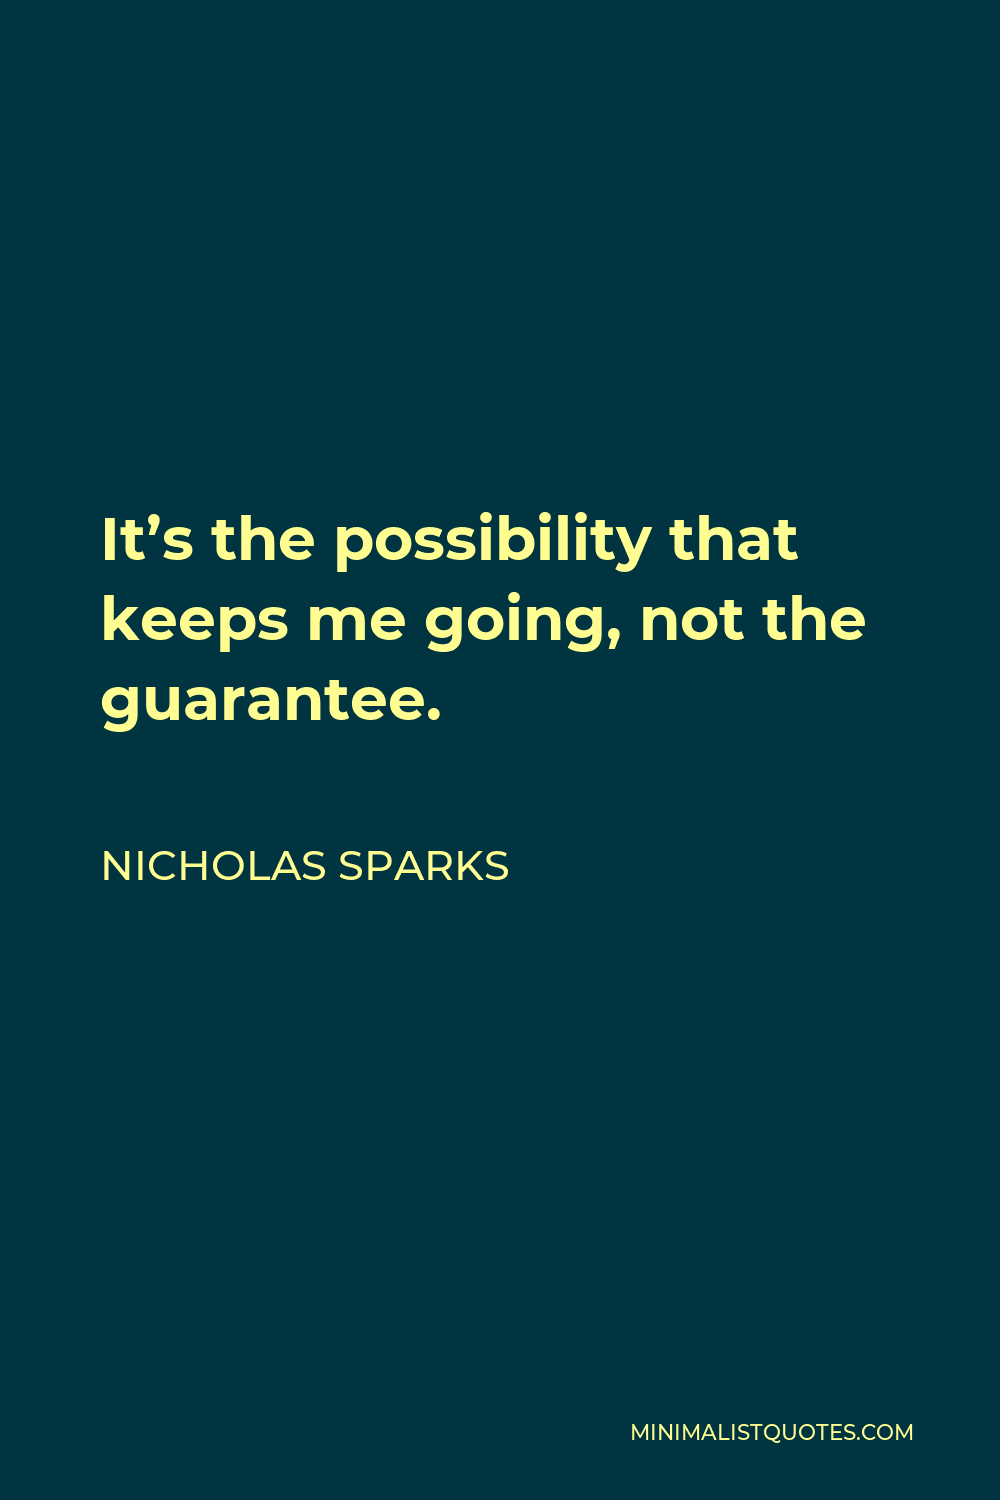 Nicholas Sparks Quote - It’s the possibility that keeps me going, not the guarantee.